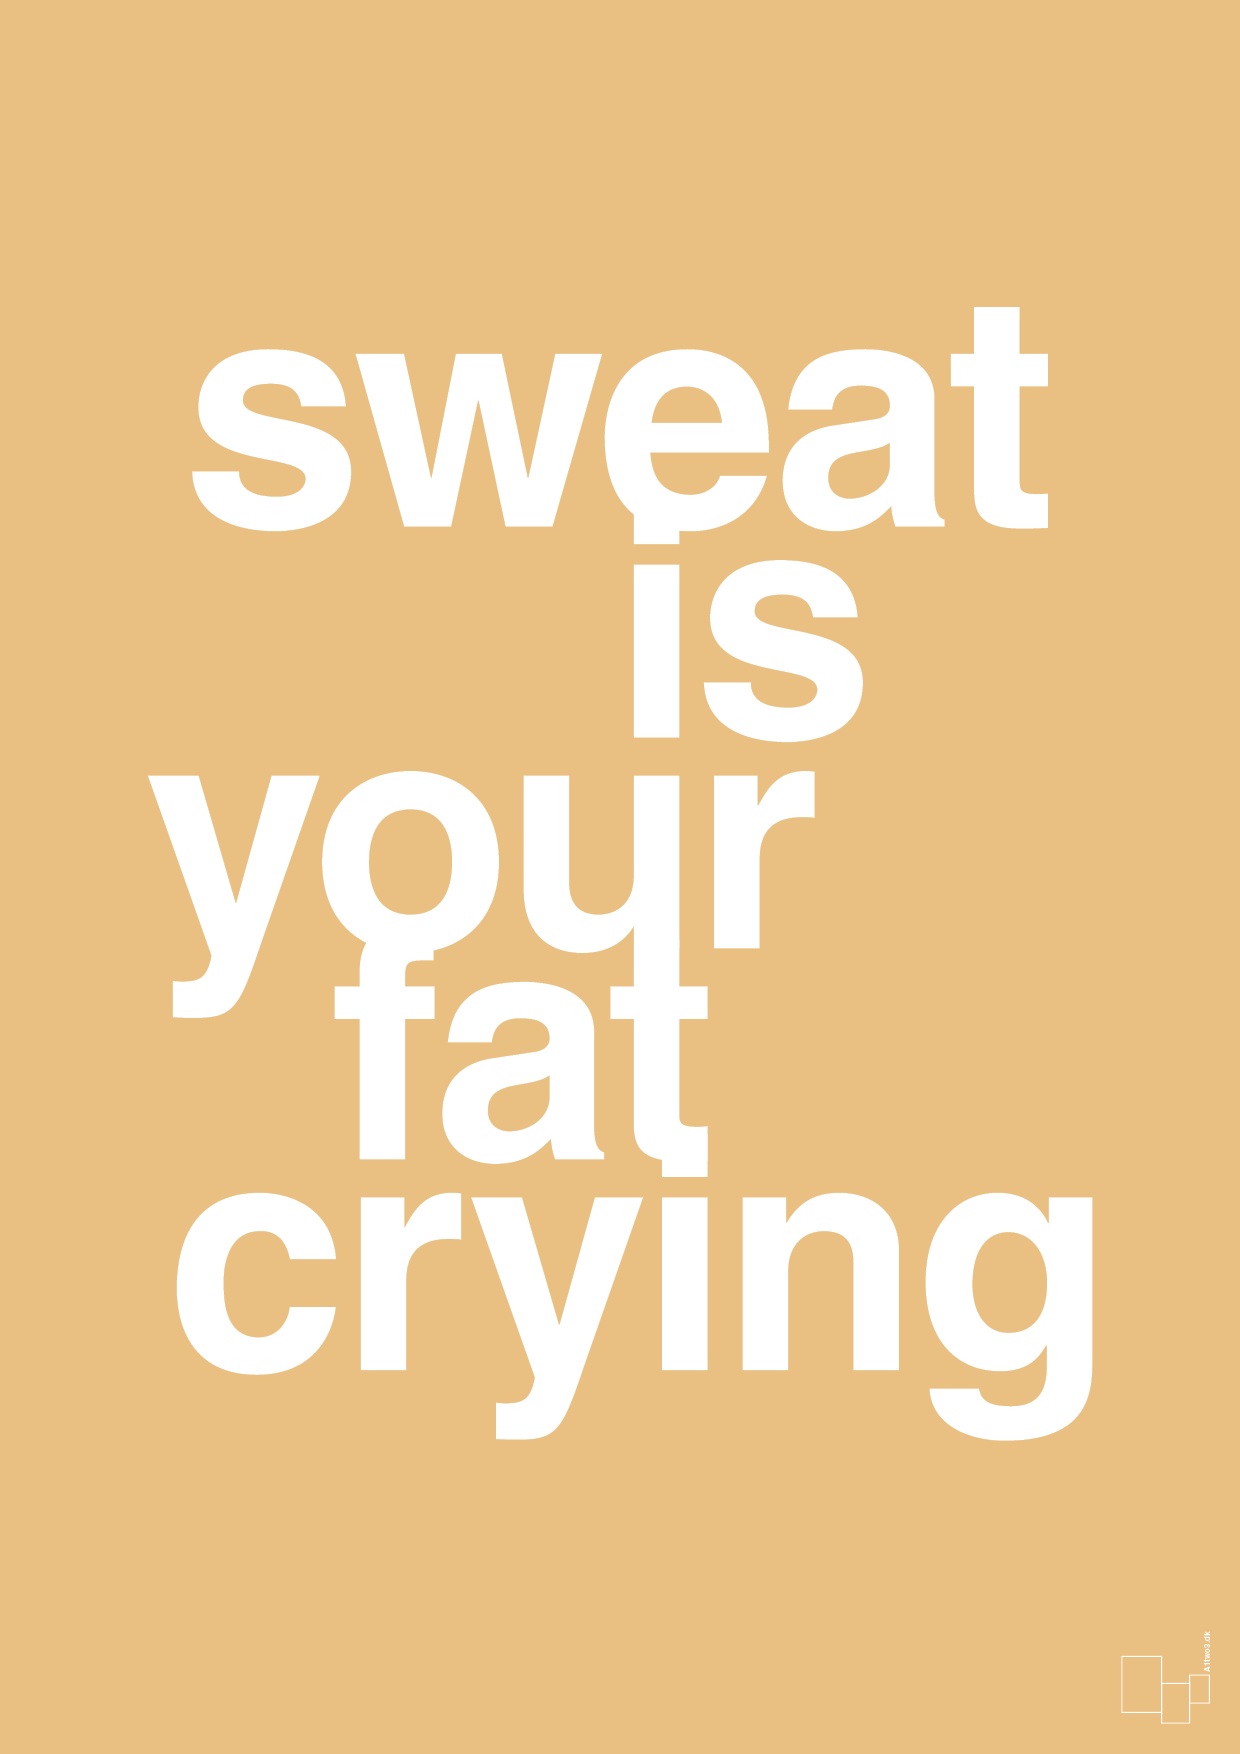 sweat is your fat crying - Plakat med Sport & Fritid i Charismatic